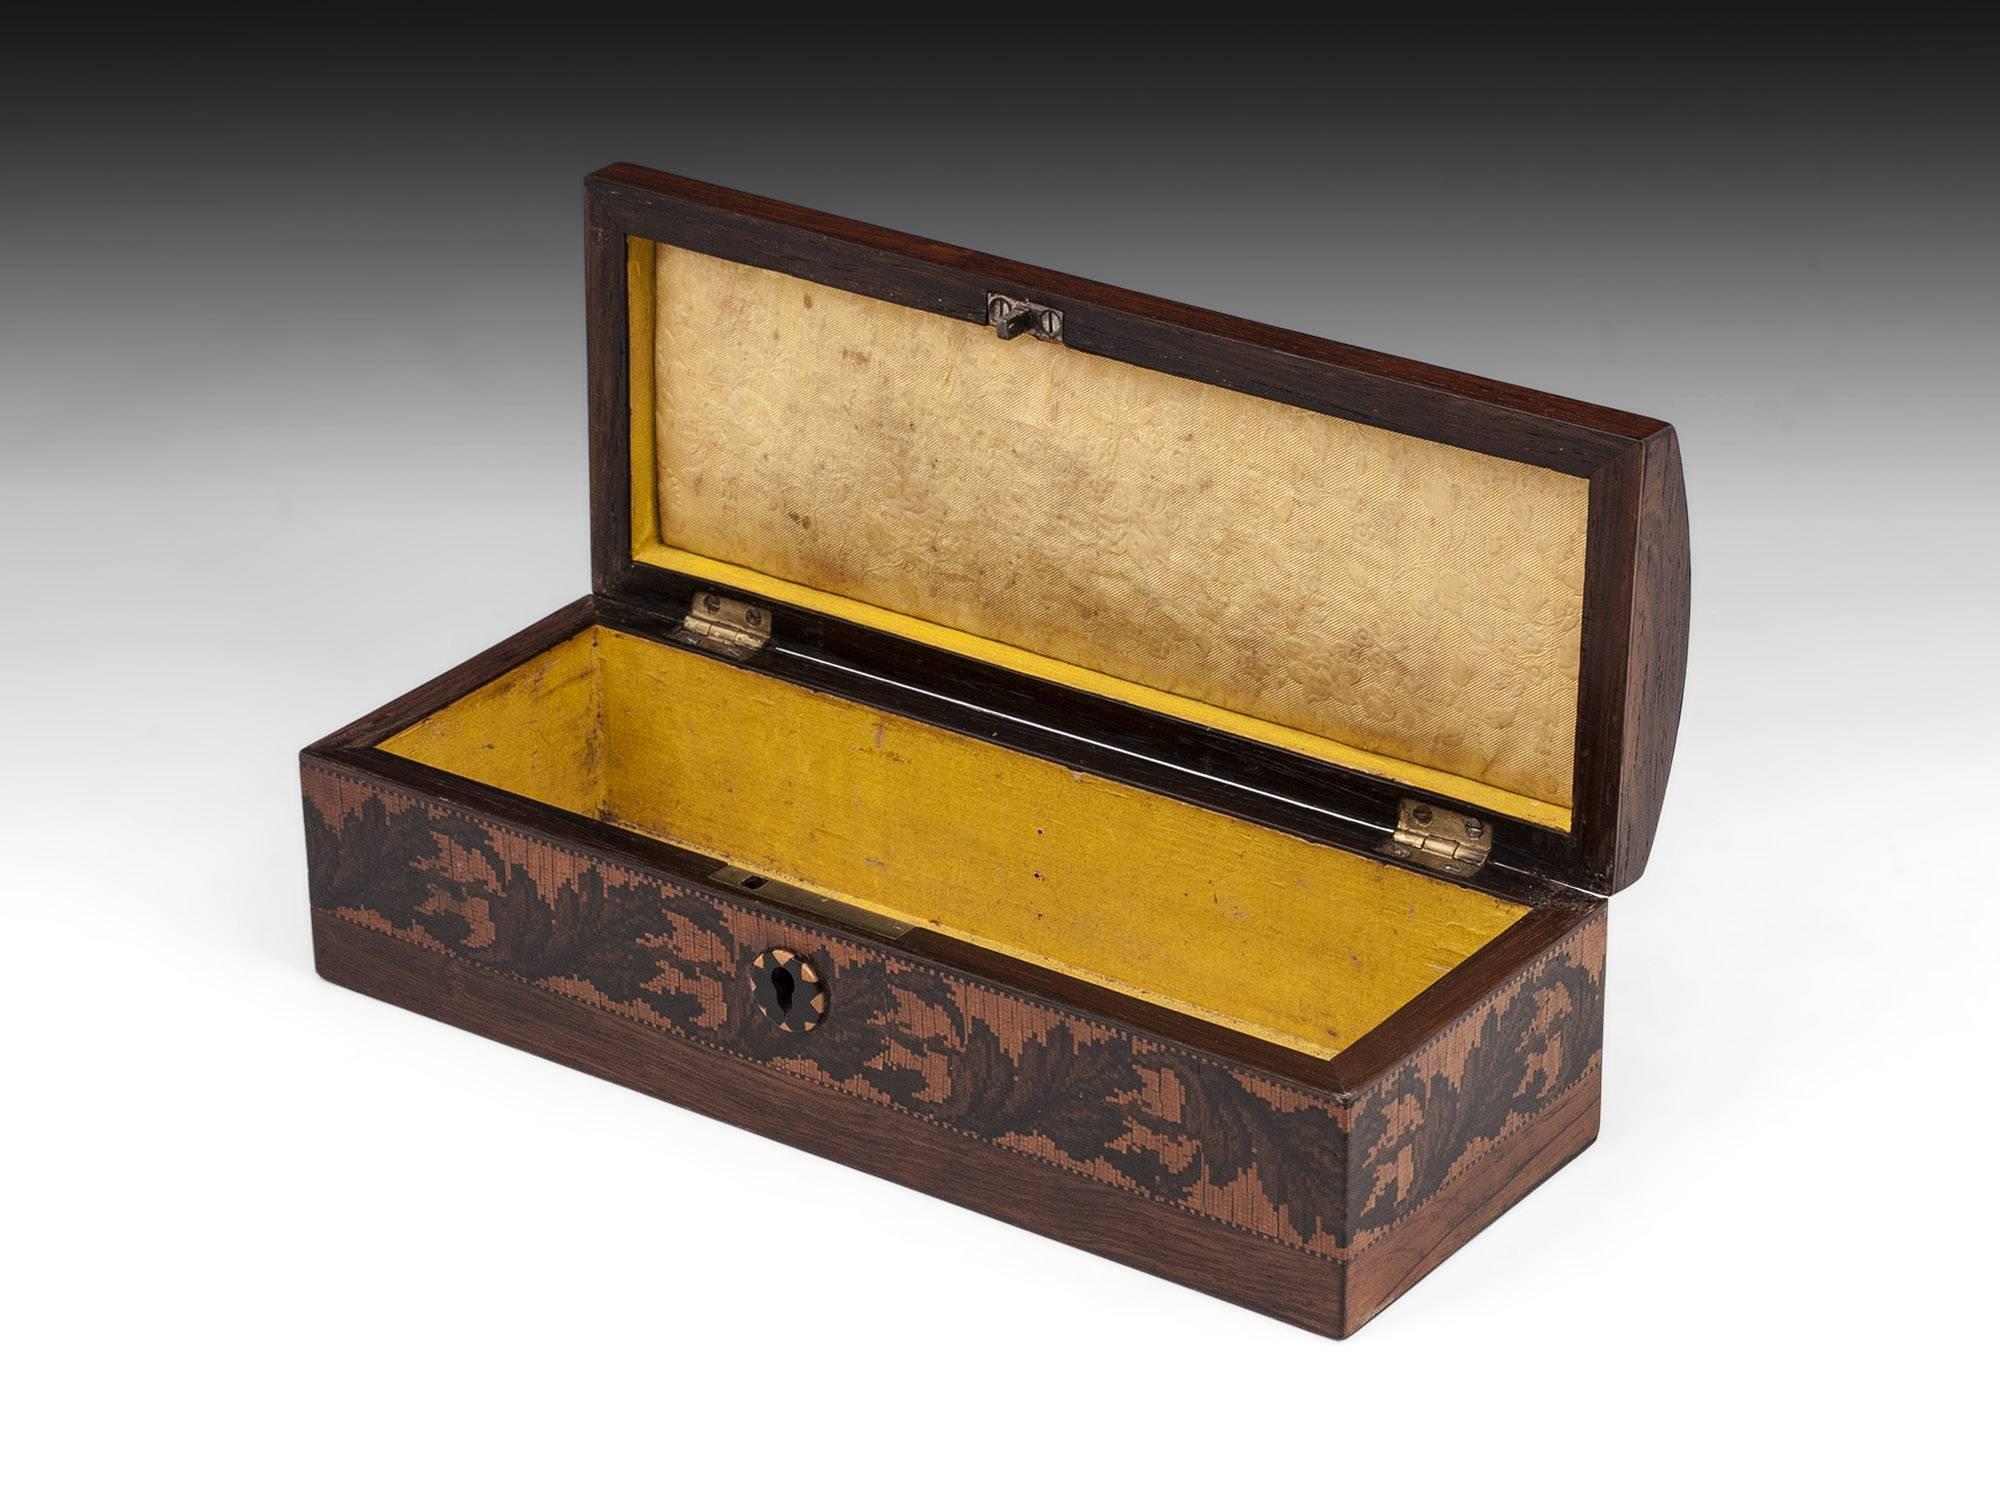 Wood Tunbridge Ware Antique Glove Box with Floral Band, 19th Century